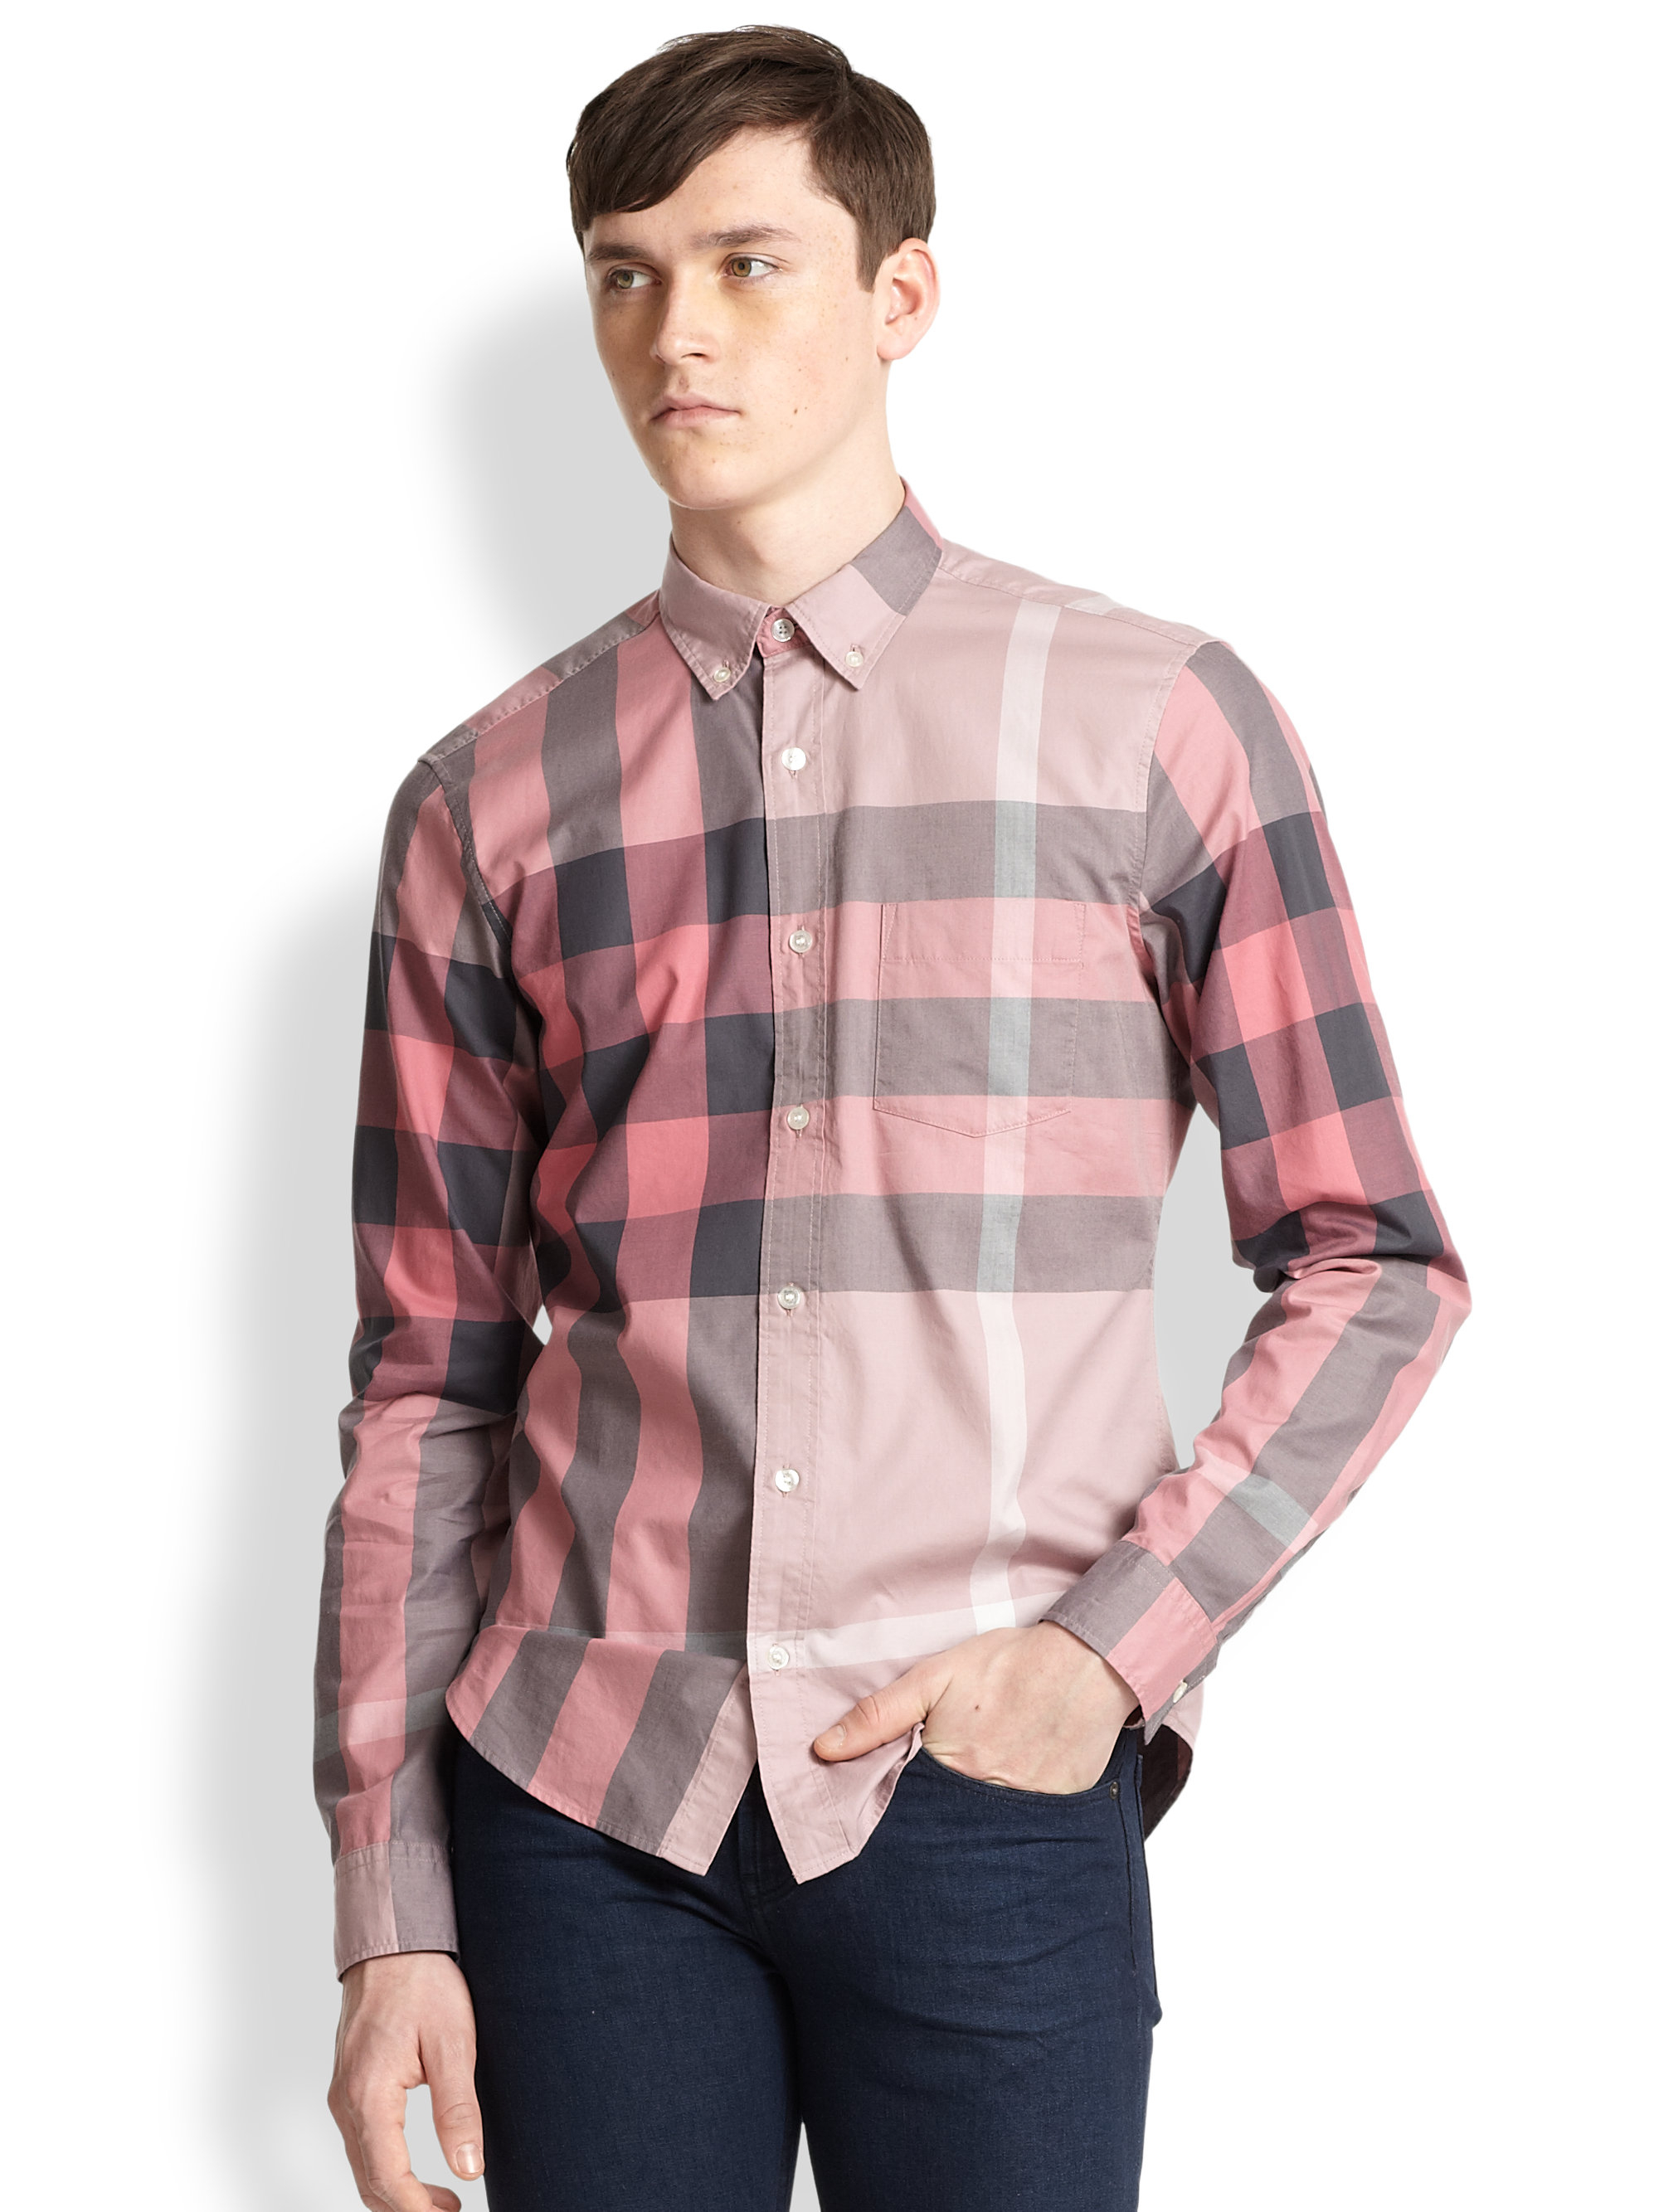 Lyst - Burberry Brit Fred Explode Check Buttondown Shirt in Pink for Men